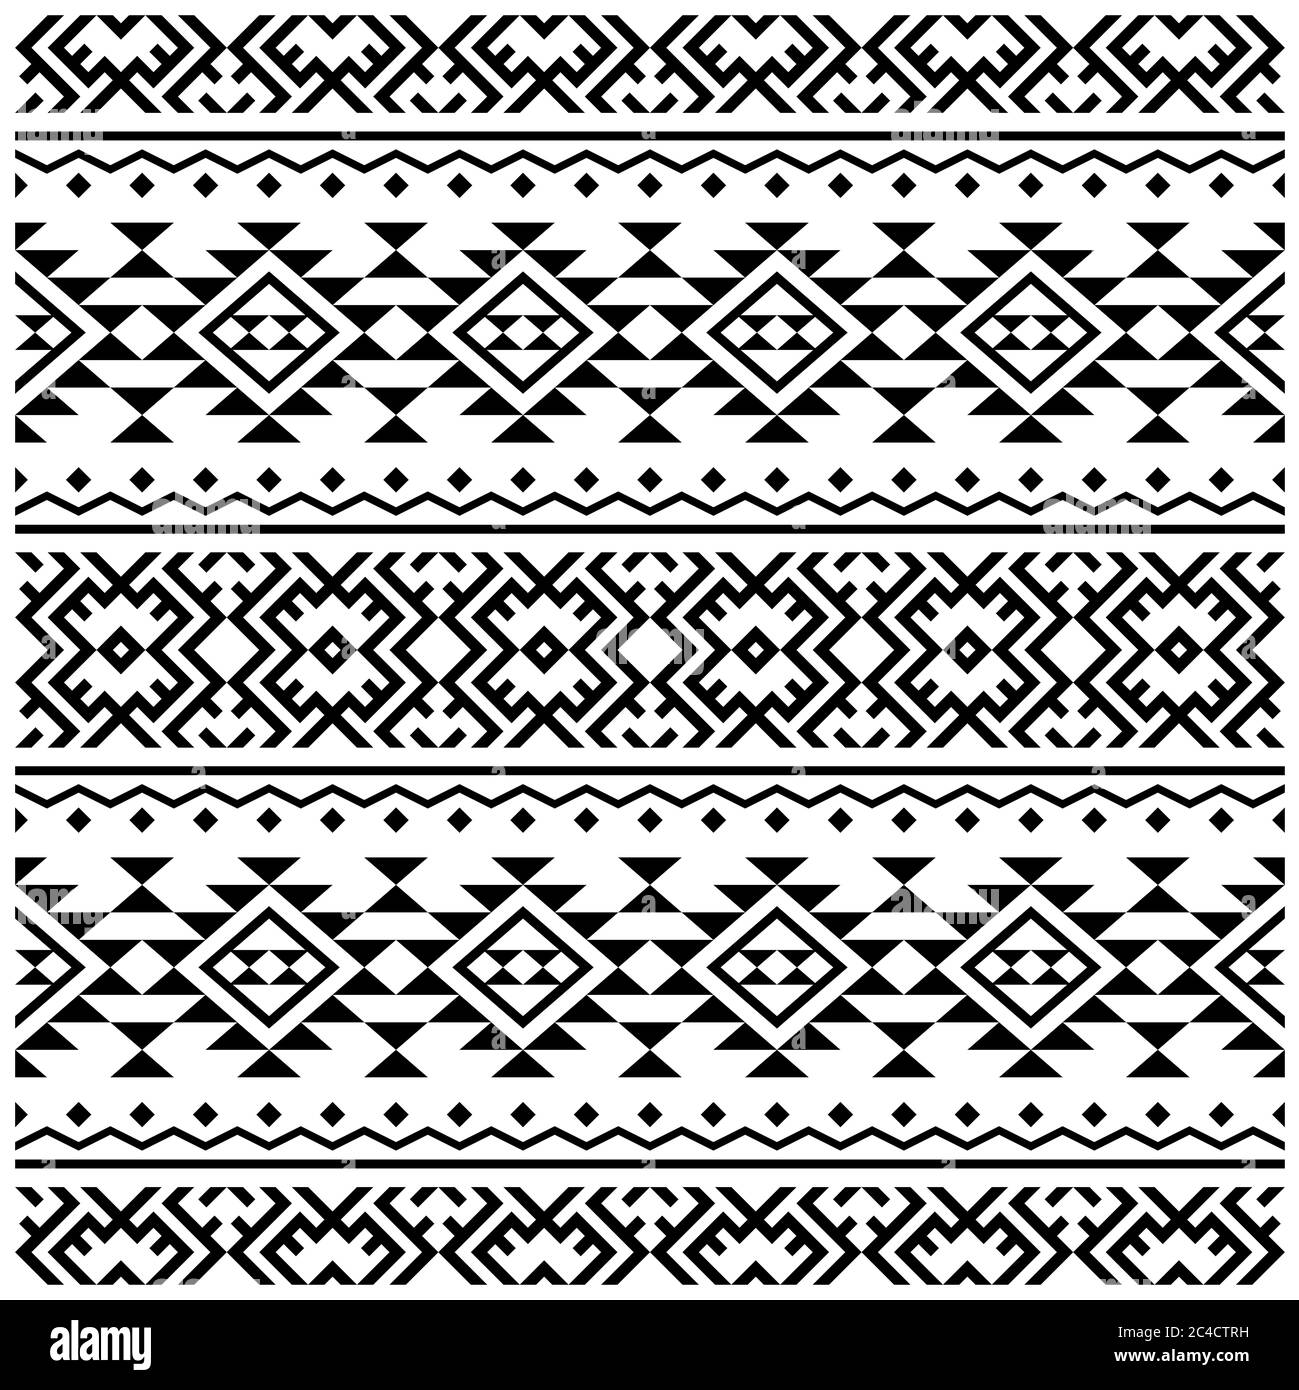 Traditional Seamless Ethnic Pattern background design in aztec, tribal ...